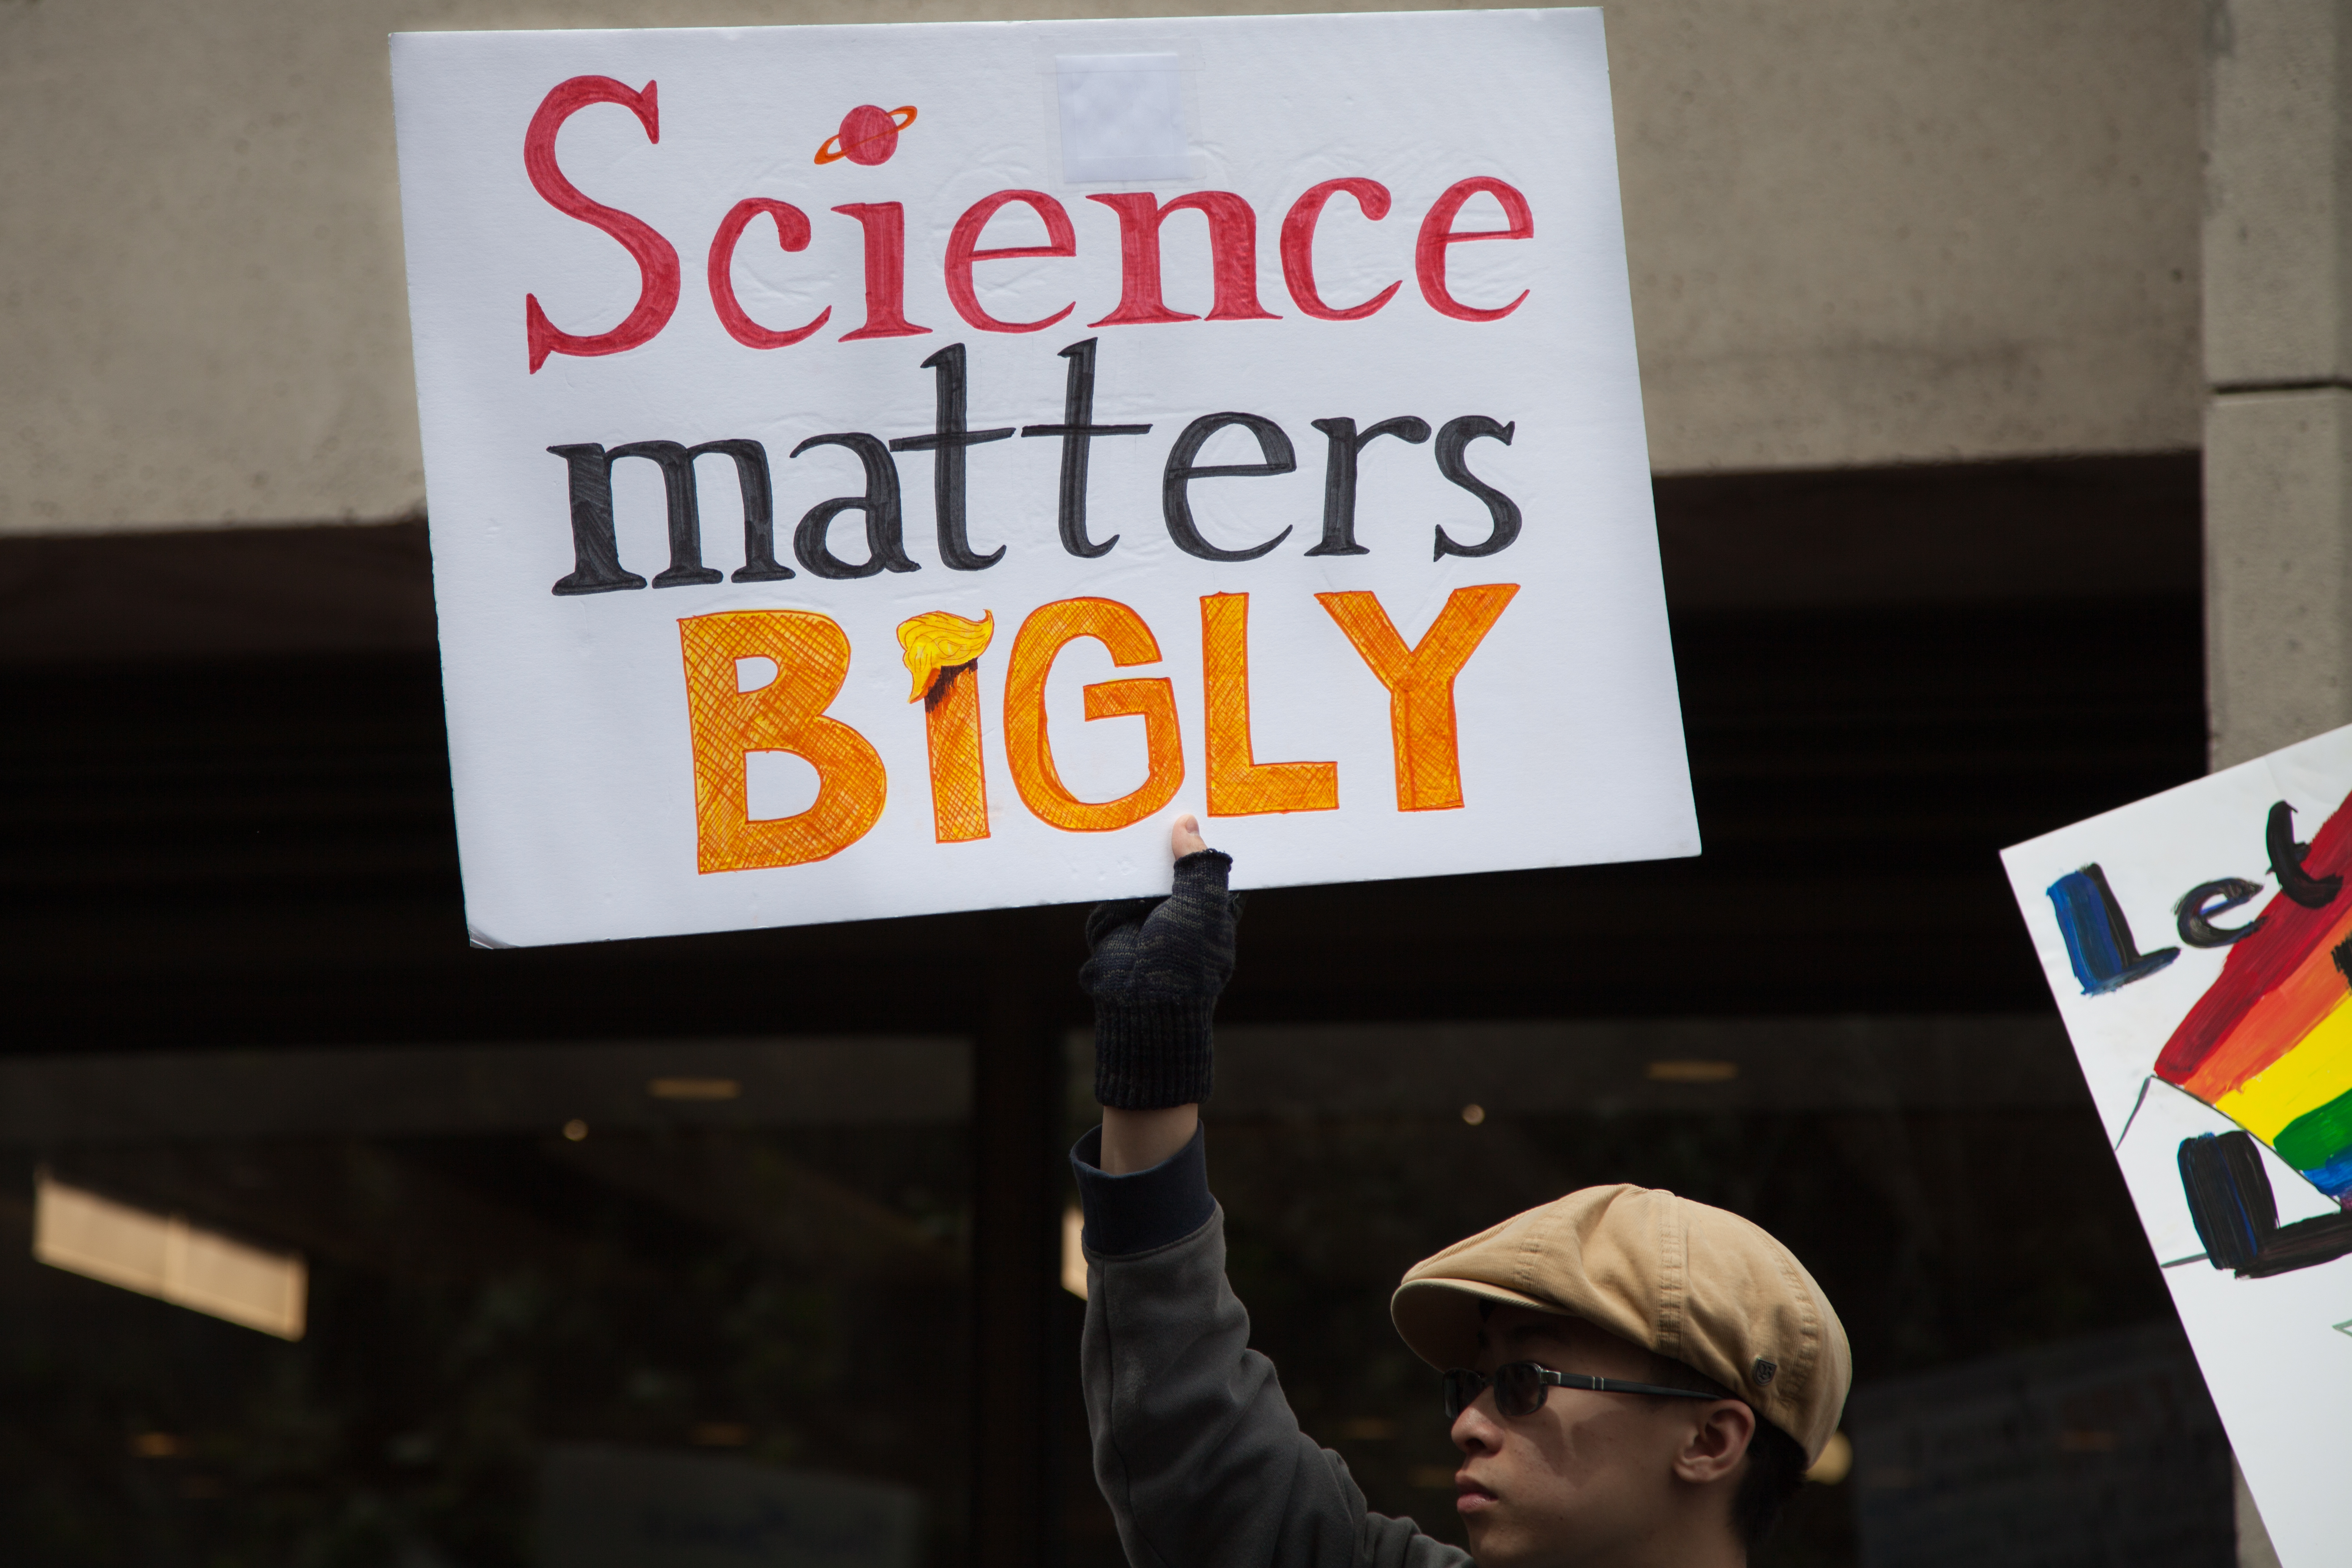 Science matters bigly